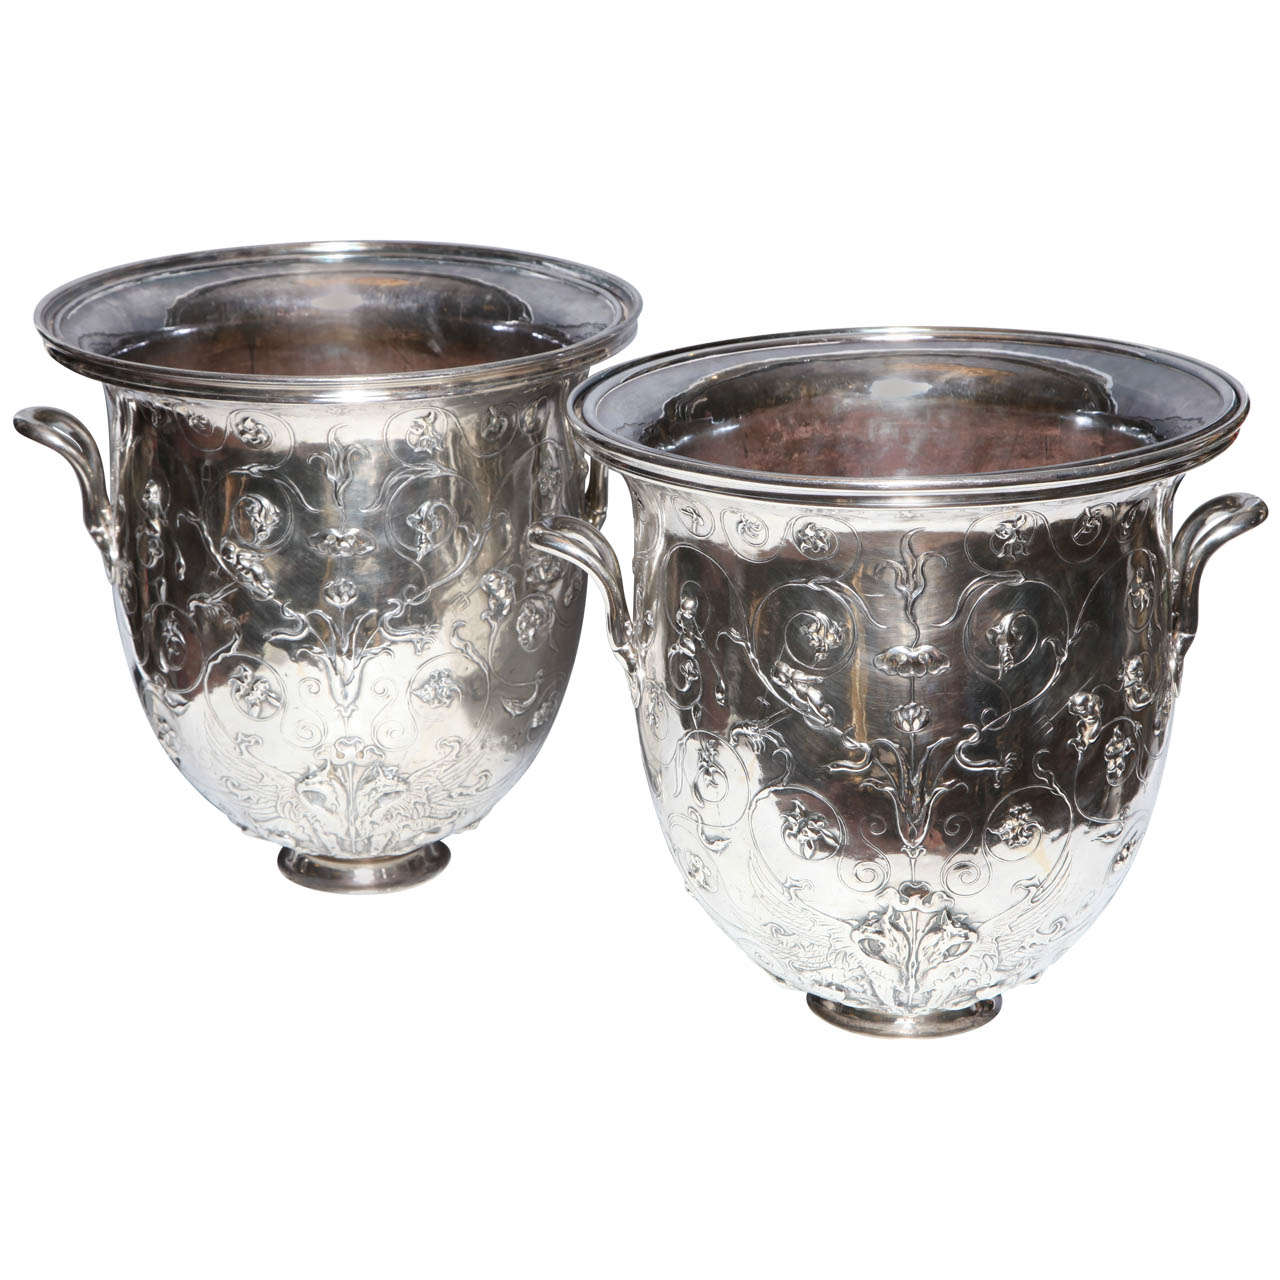 Monumental Pair of Neoclassical Silvered Bronze Champagne Buckets: Christofle